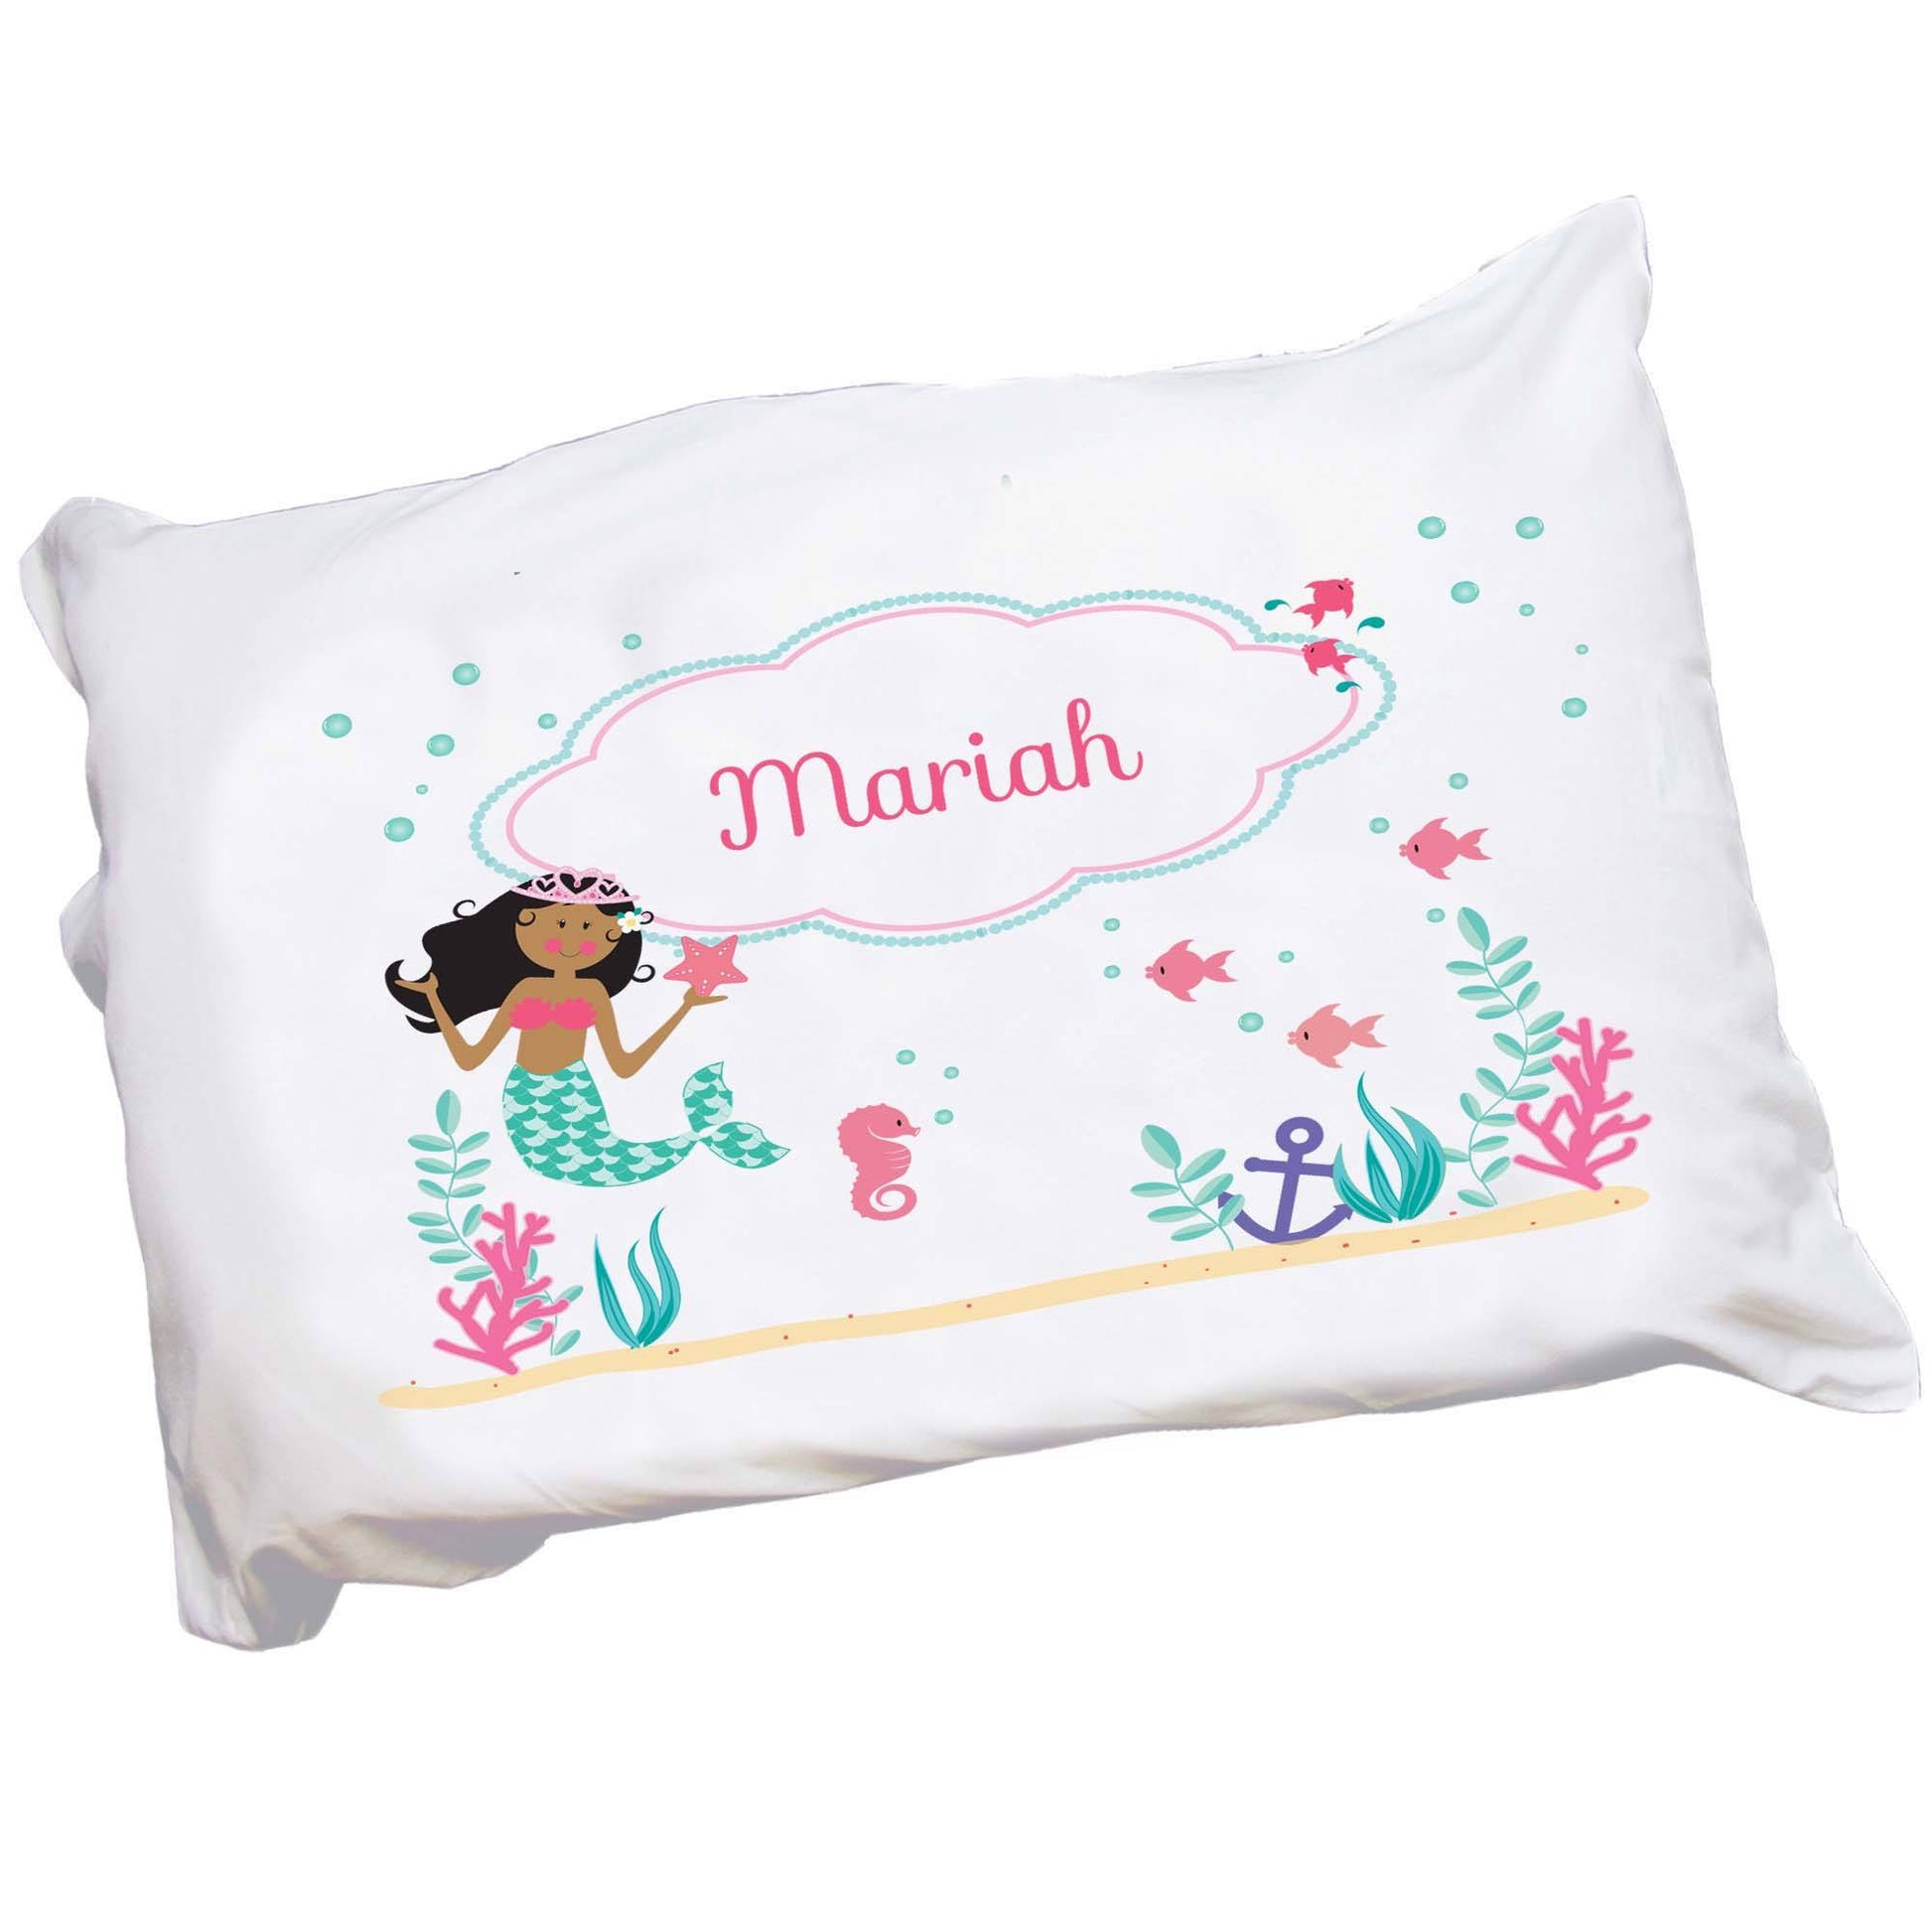 Personalized Childrens Pillowcase with African American Mermaid Princess design